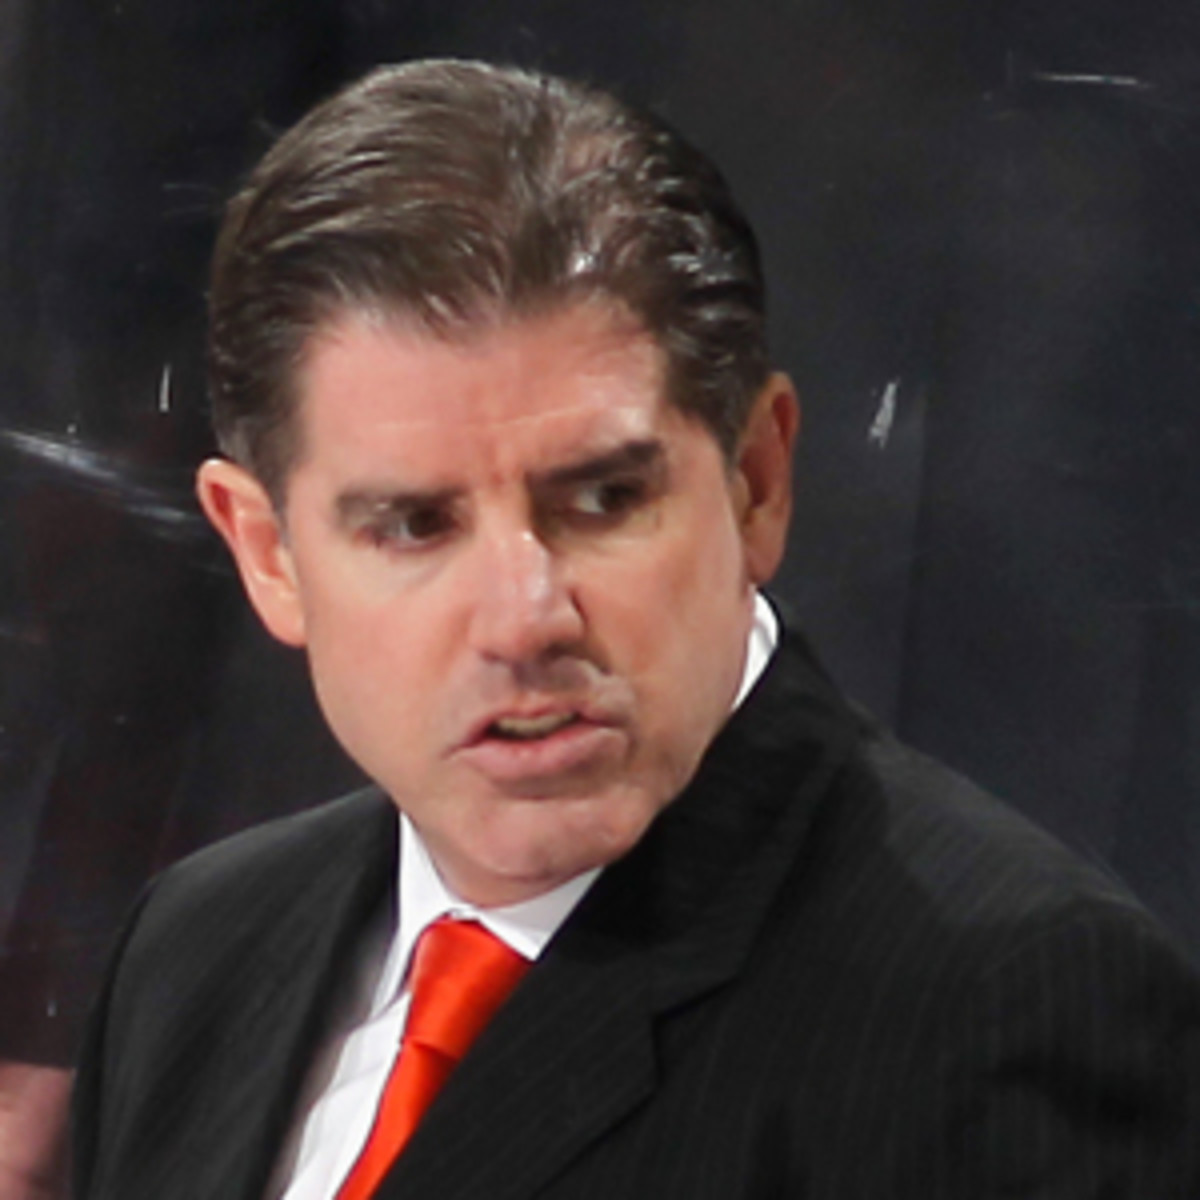 Peter Laviolette has come under fire from Flyers fans during their disappointing 2013 showing. (Andy Marlin/NHL/Getty Images)